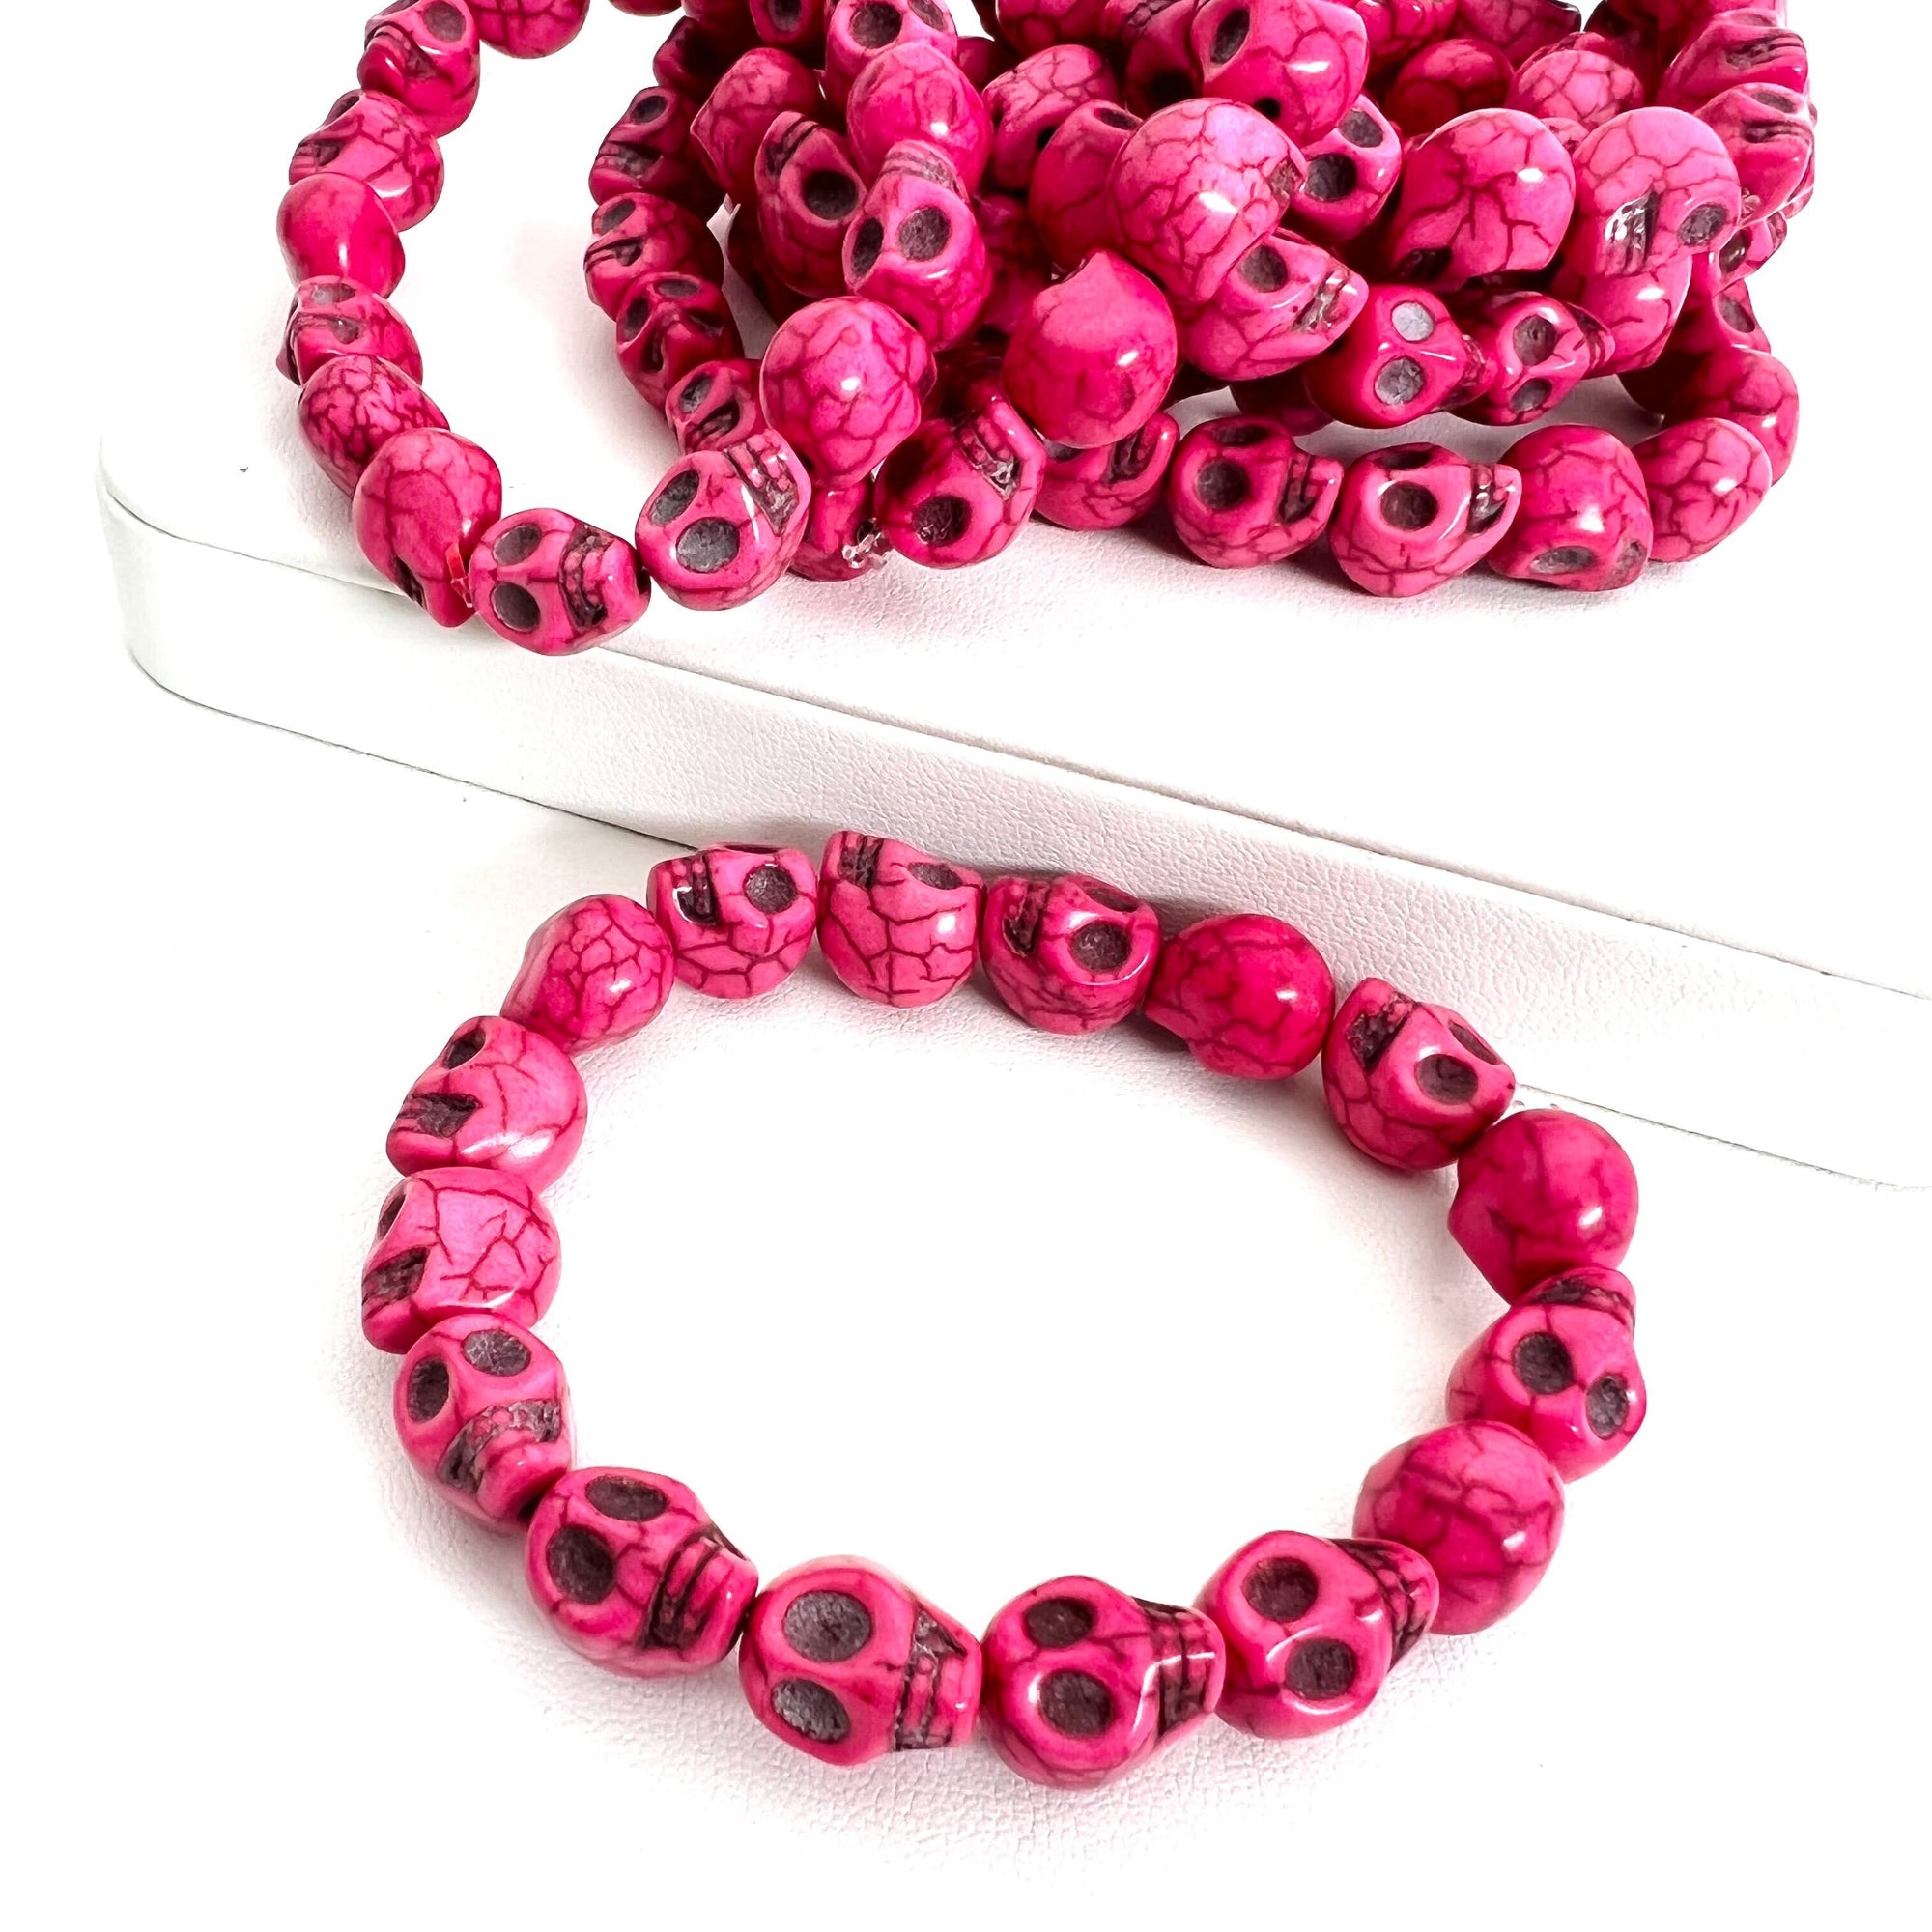 Hespera Exclusive Pink LUX Skull Stretchy Bracelet - Boujee Boutique 